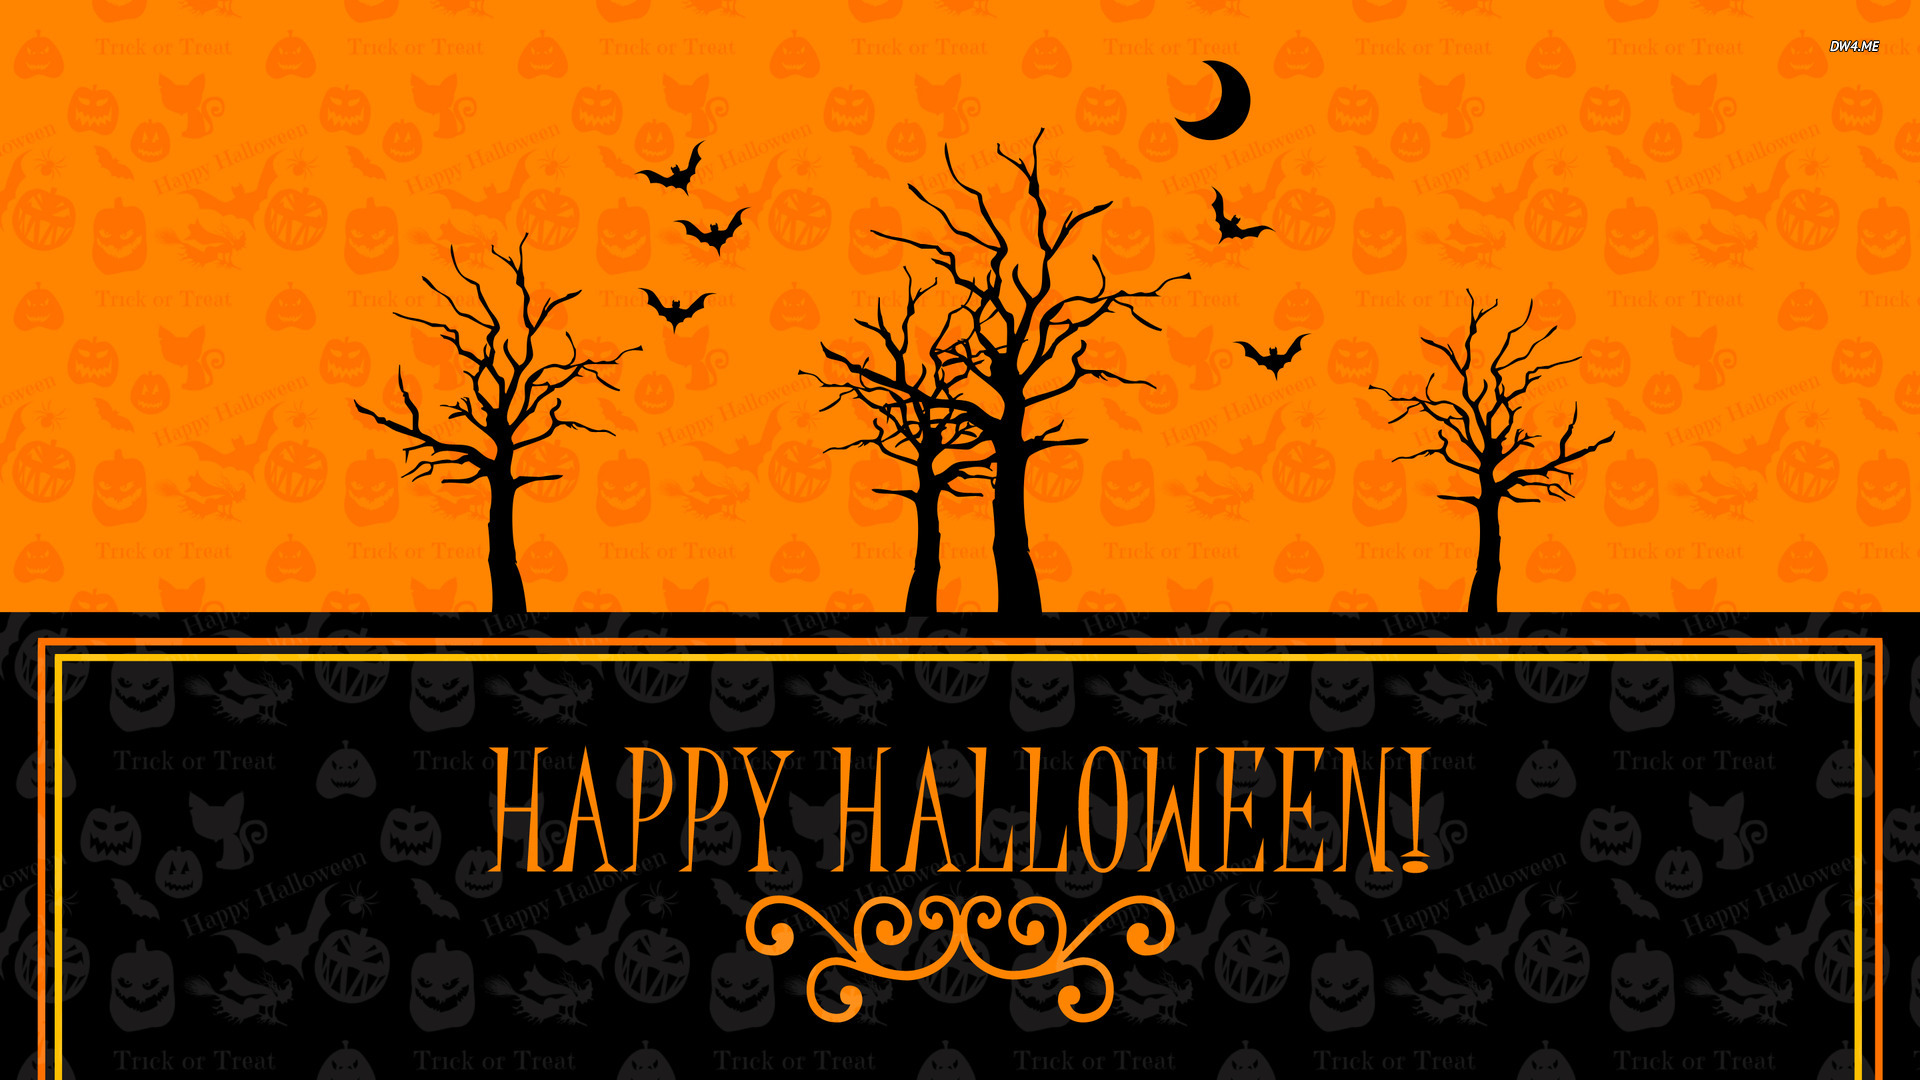 Happy Halloween from KBIConstruction